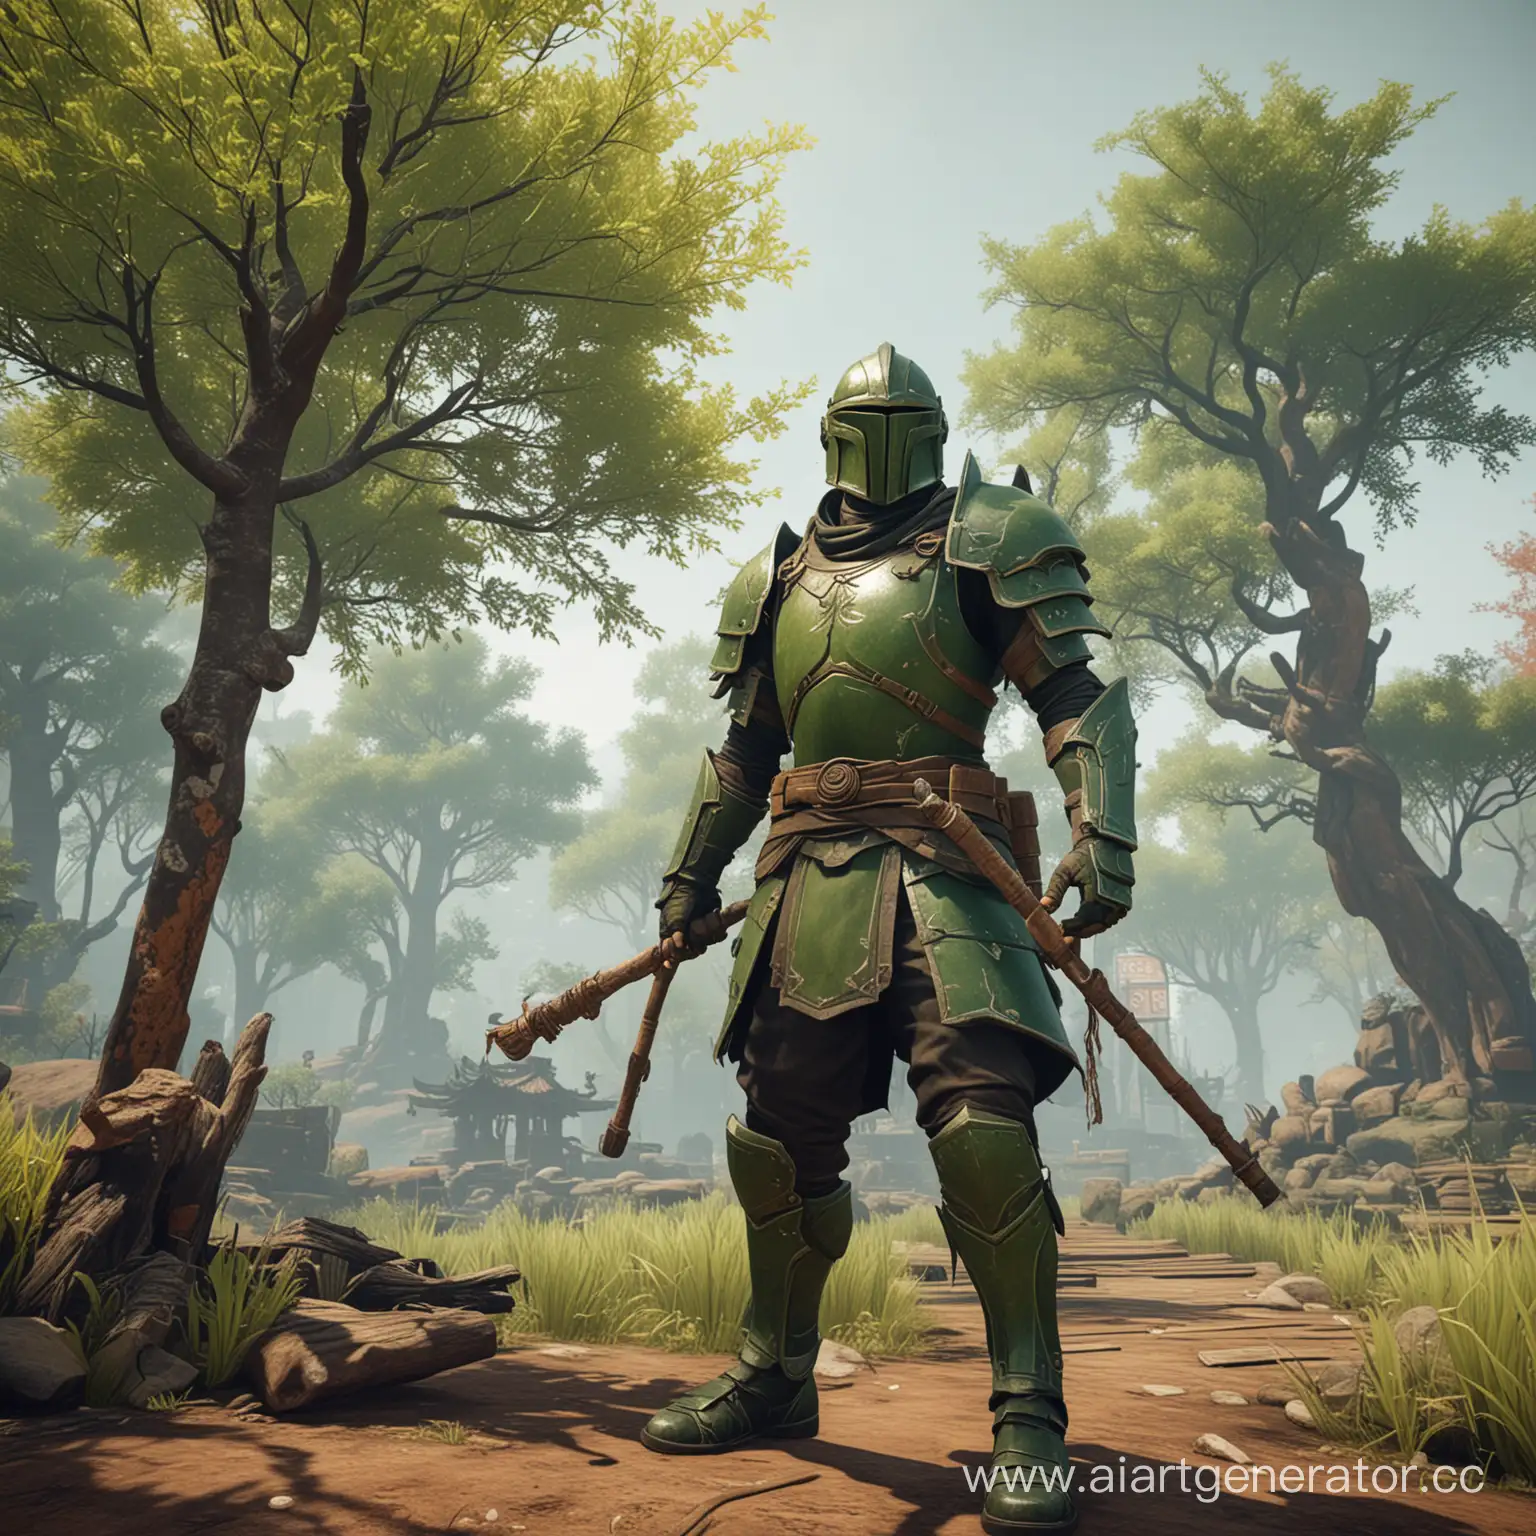 RUST-Game-Warrior-in-Green-Armor-with-Wooden-Staff-and-Chinese-Tree-Background